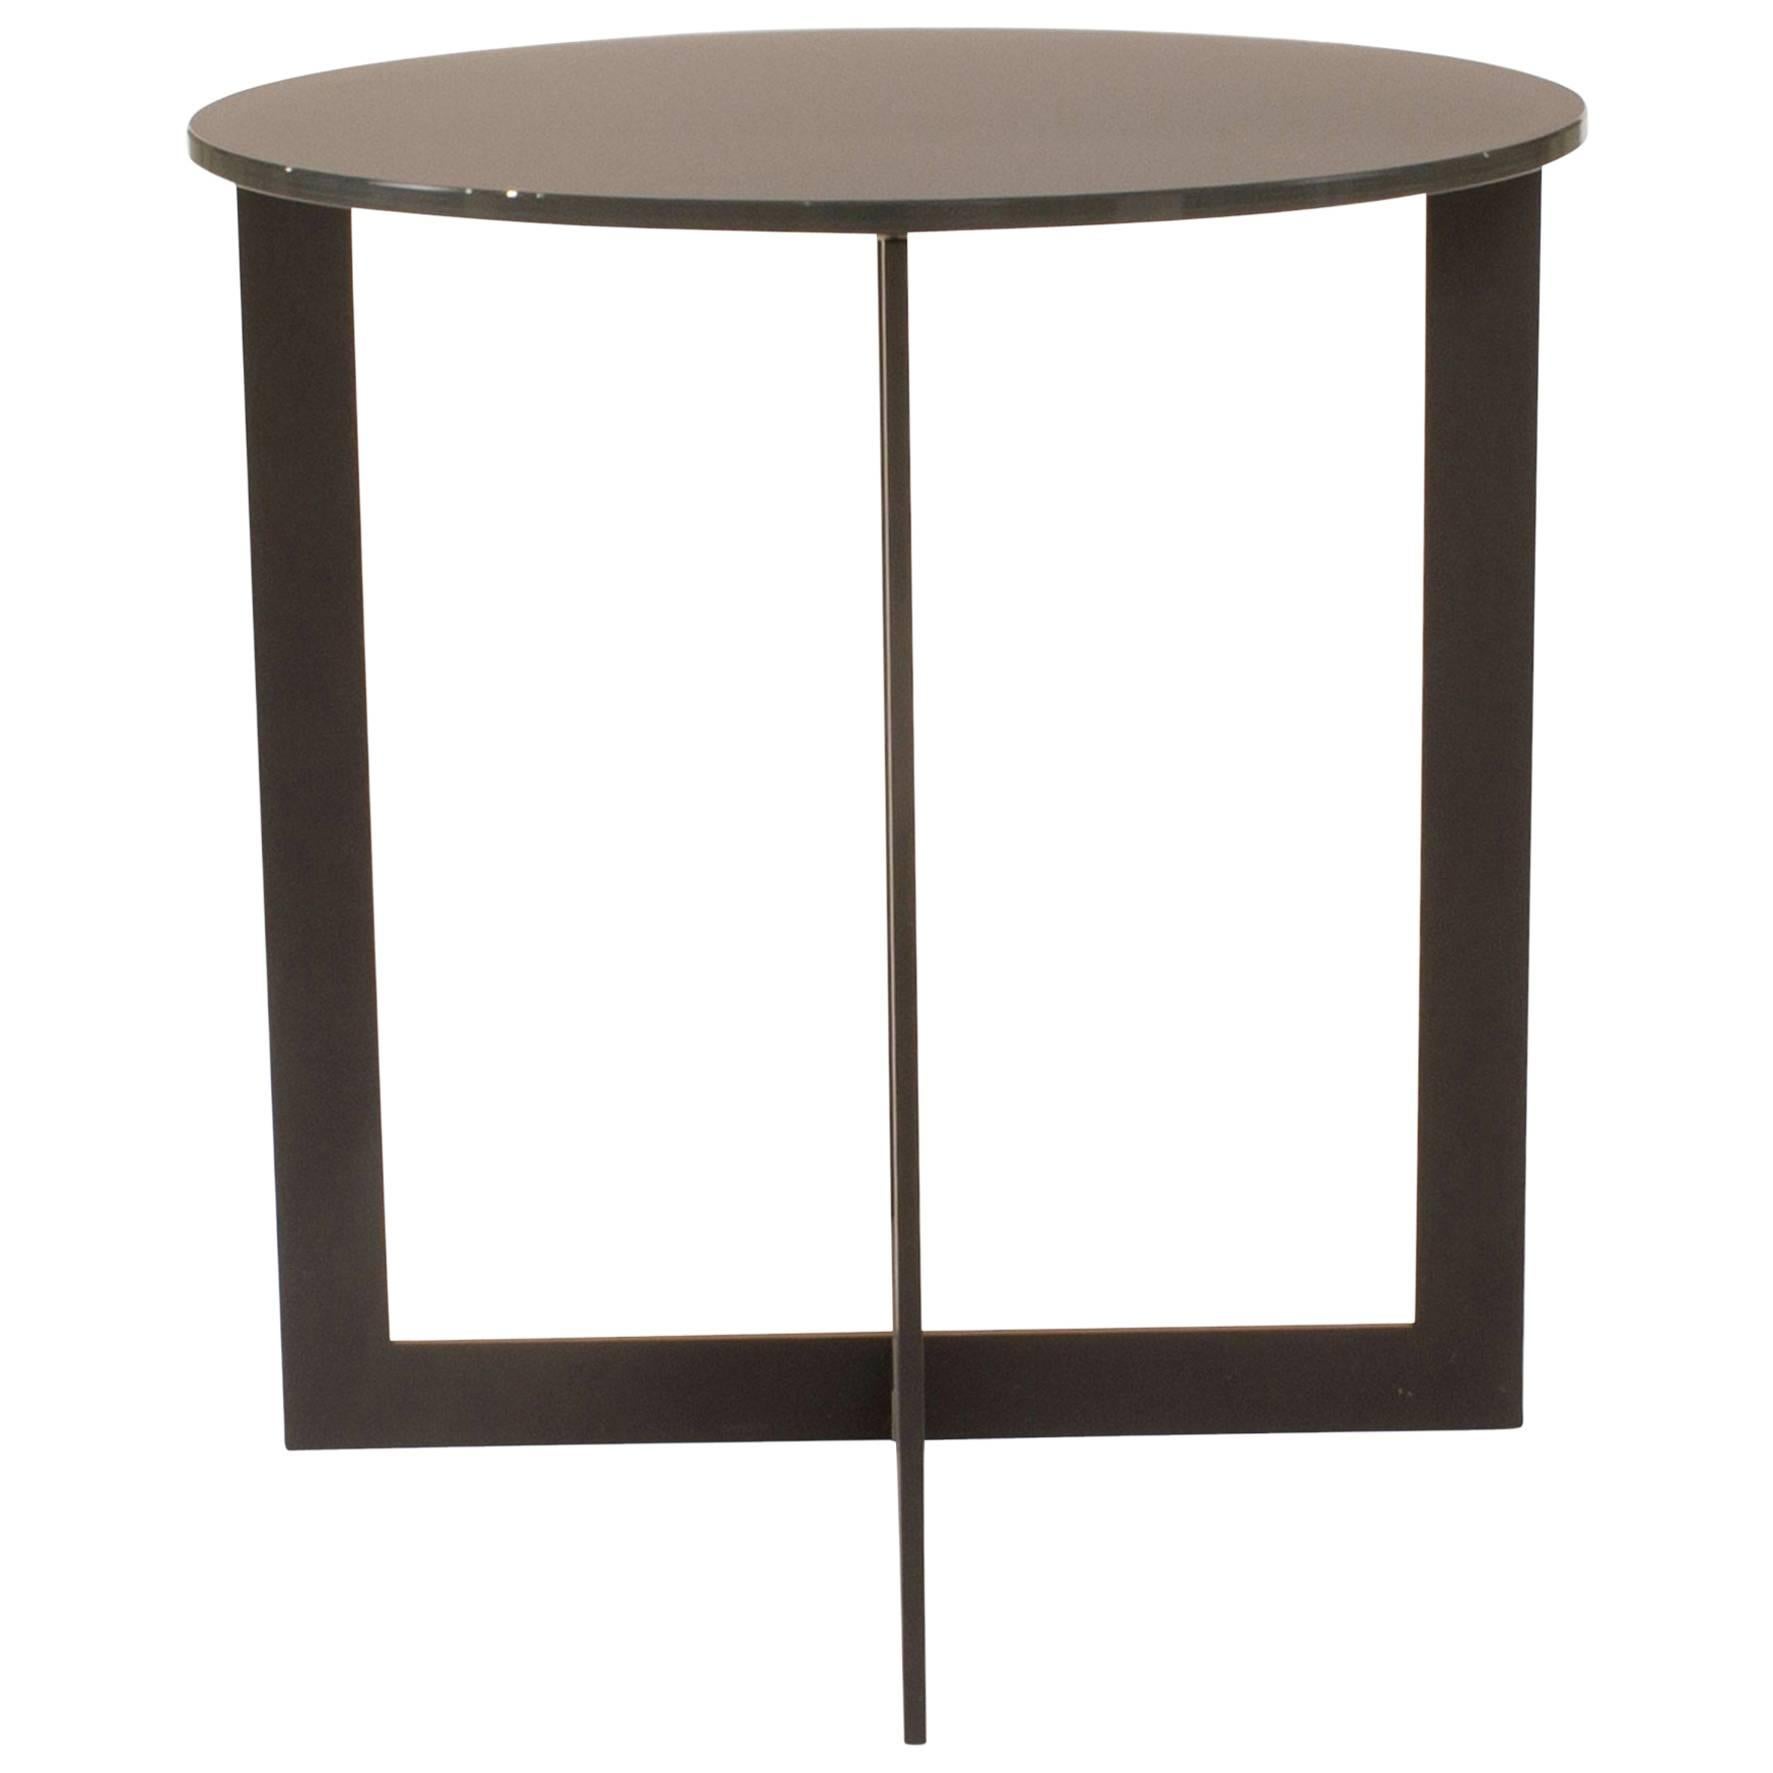 Round Glass Top Domino Side Table by Nicola Gallizia for Molteni, Italy For Sale